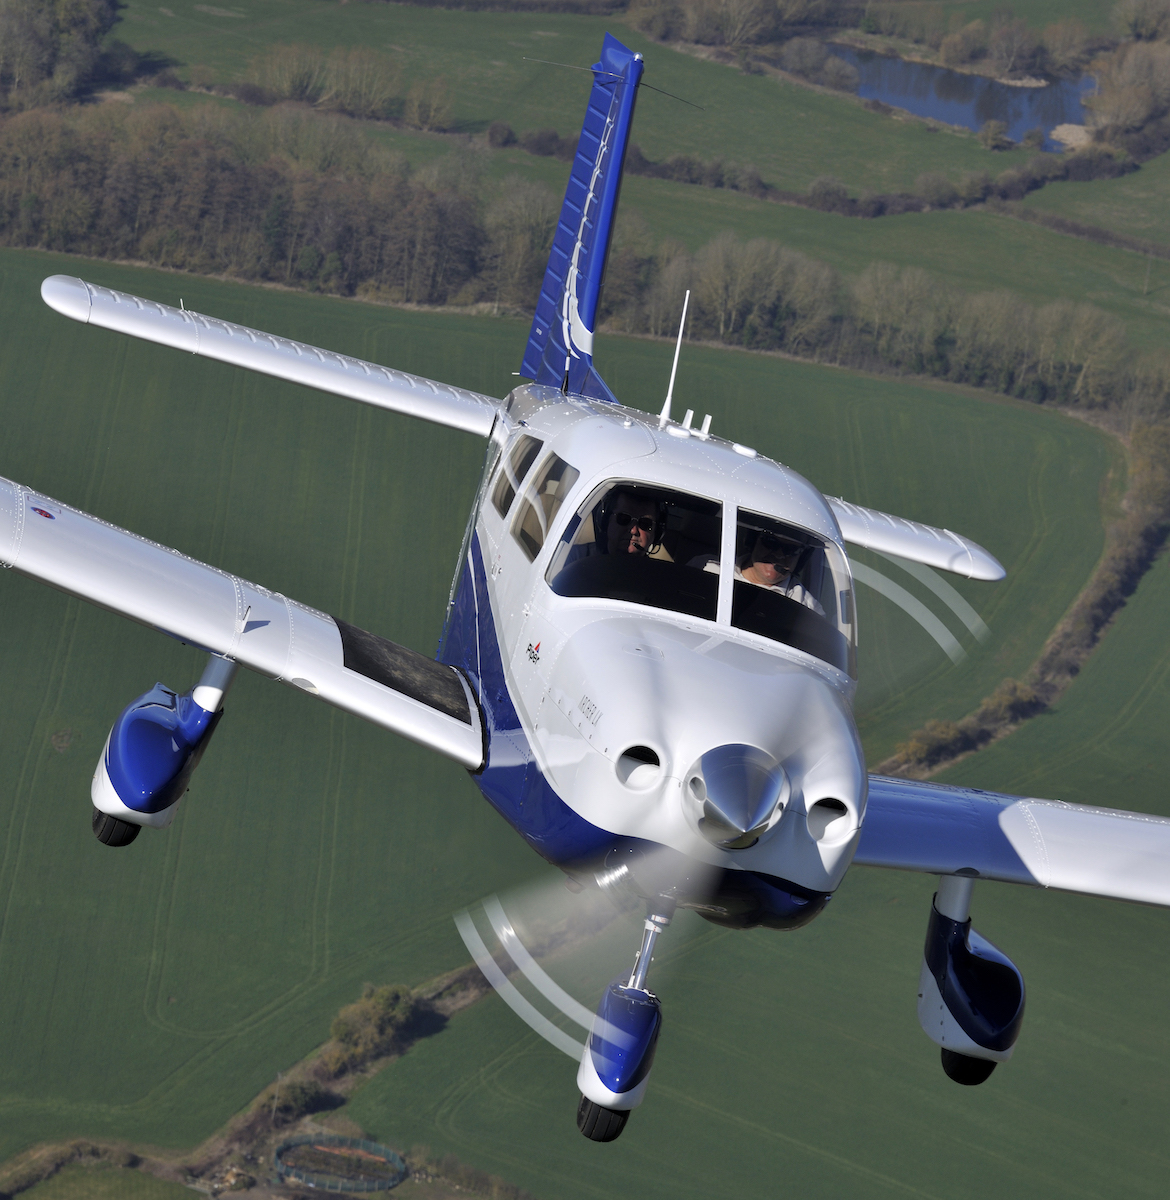 The Piper Archer LX PA-28 G-IBEA in flight. (Keith Wilson/SFB Photographic)